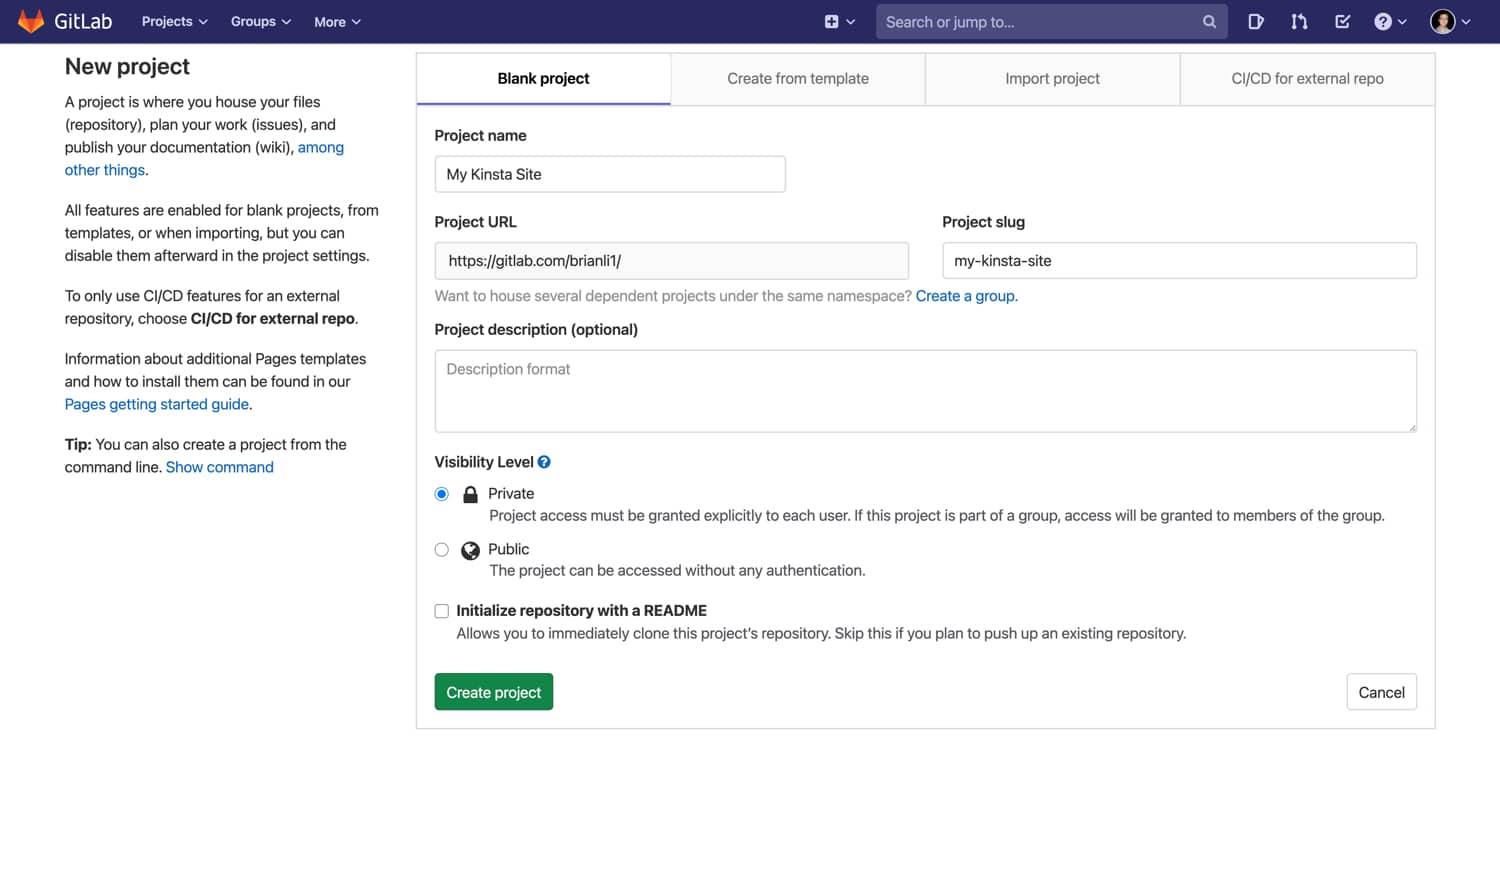 Create a blank project in GitLab.